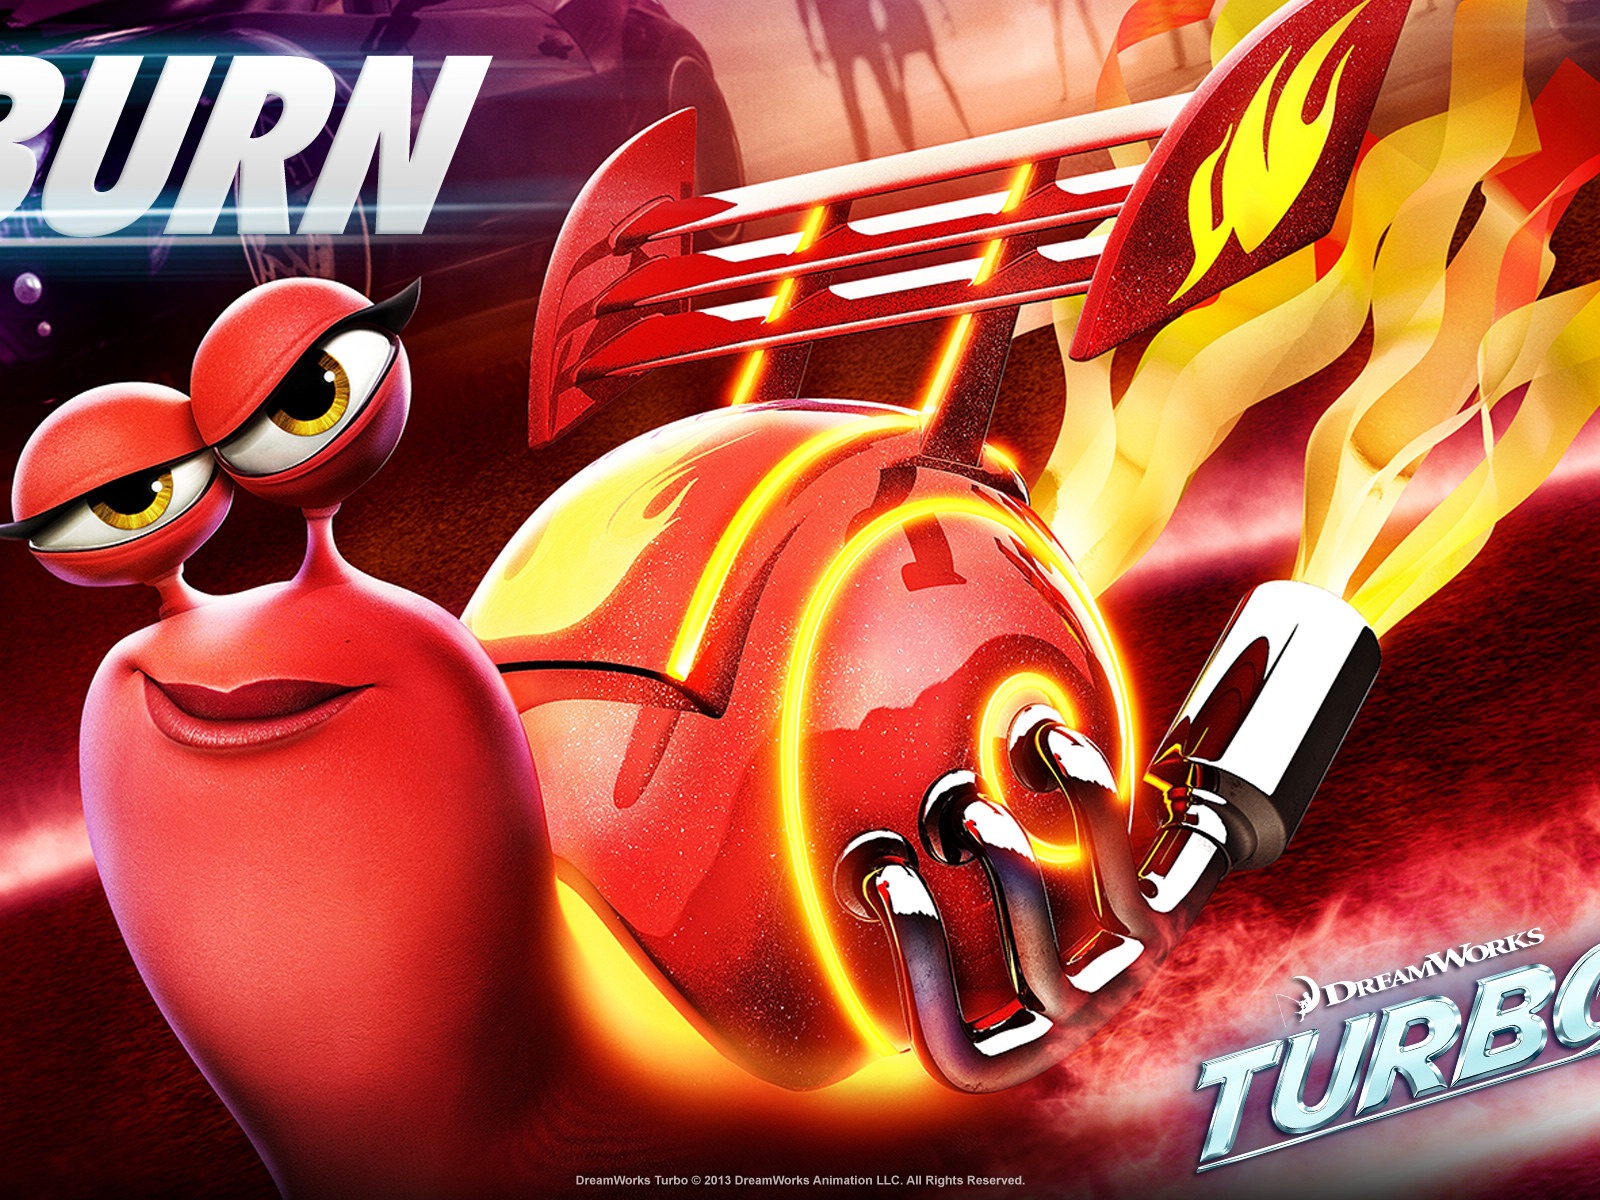 Turbo 3D movie HD wallpapers #7 - 1600x1200